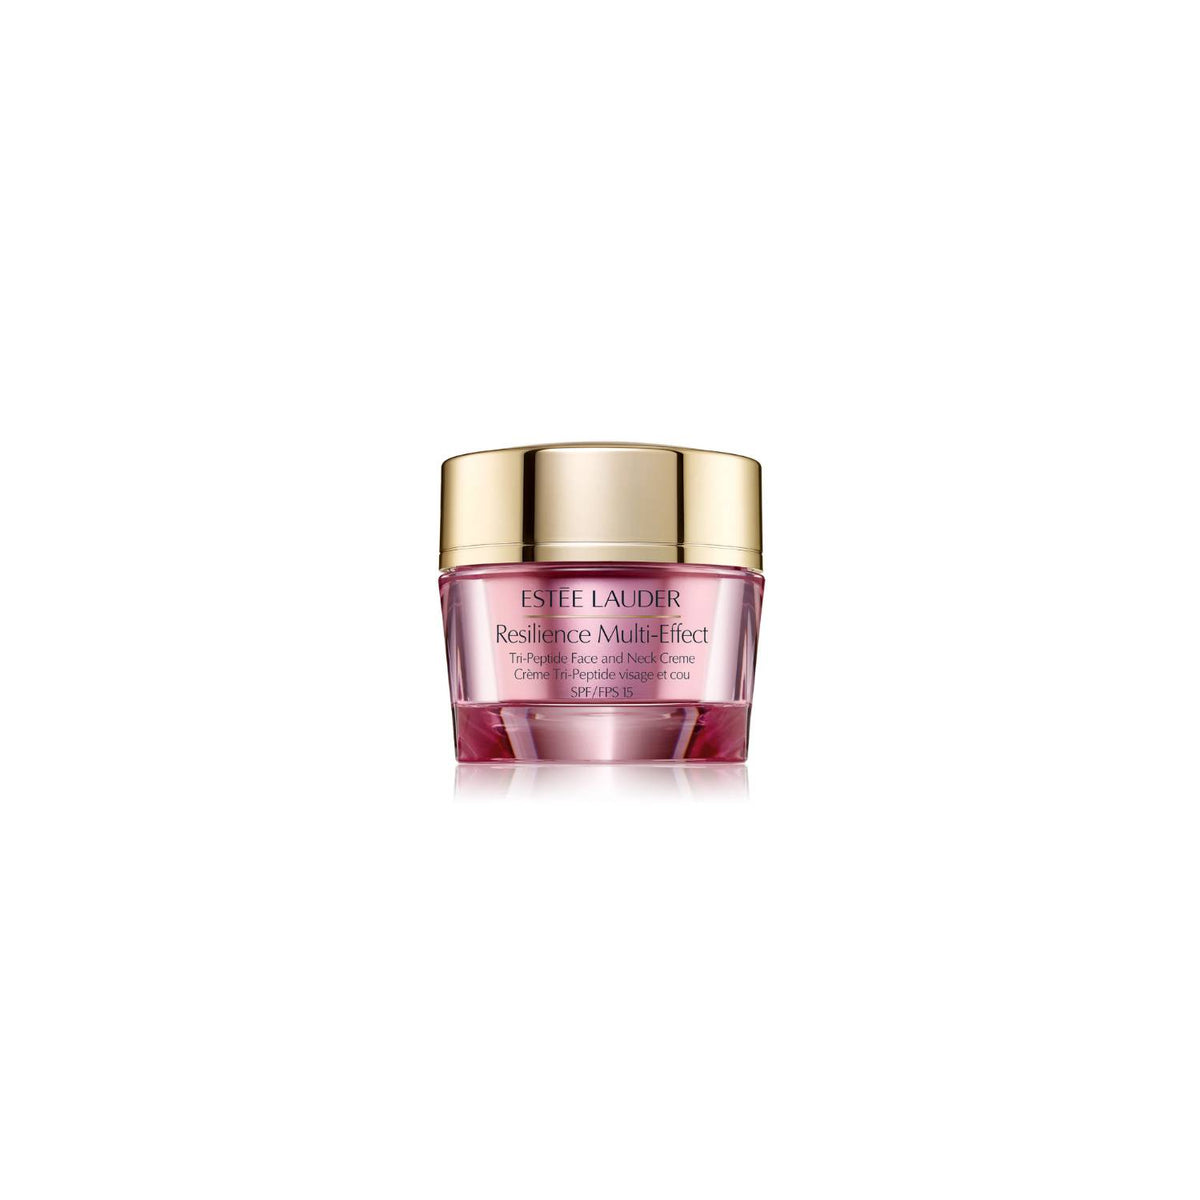 Resilience Lift Multi-Effect Firming/Lifting Face and Neck Cream SPF 15/PA+++, N/C